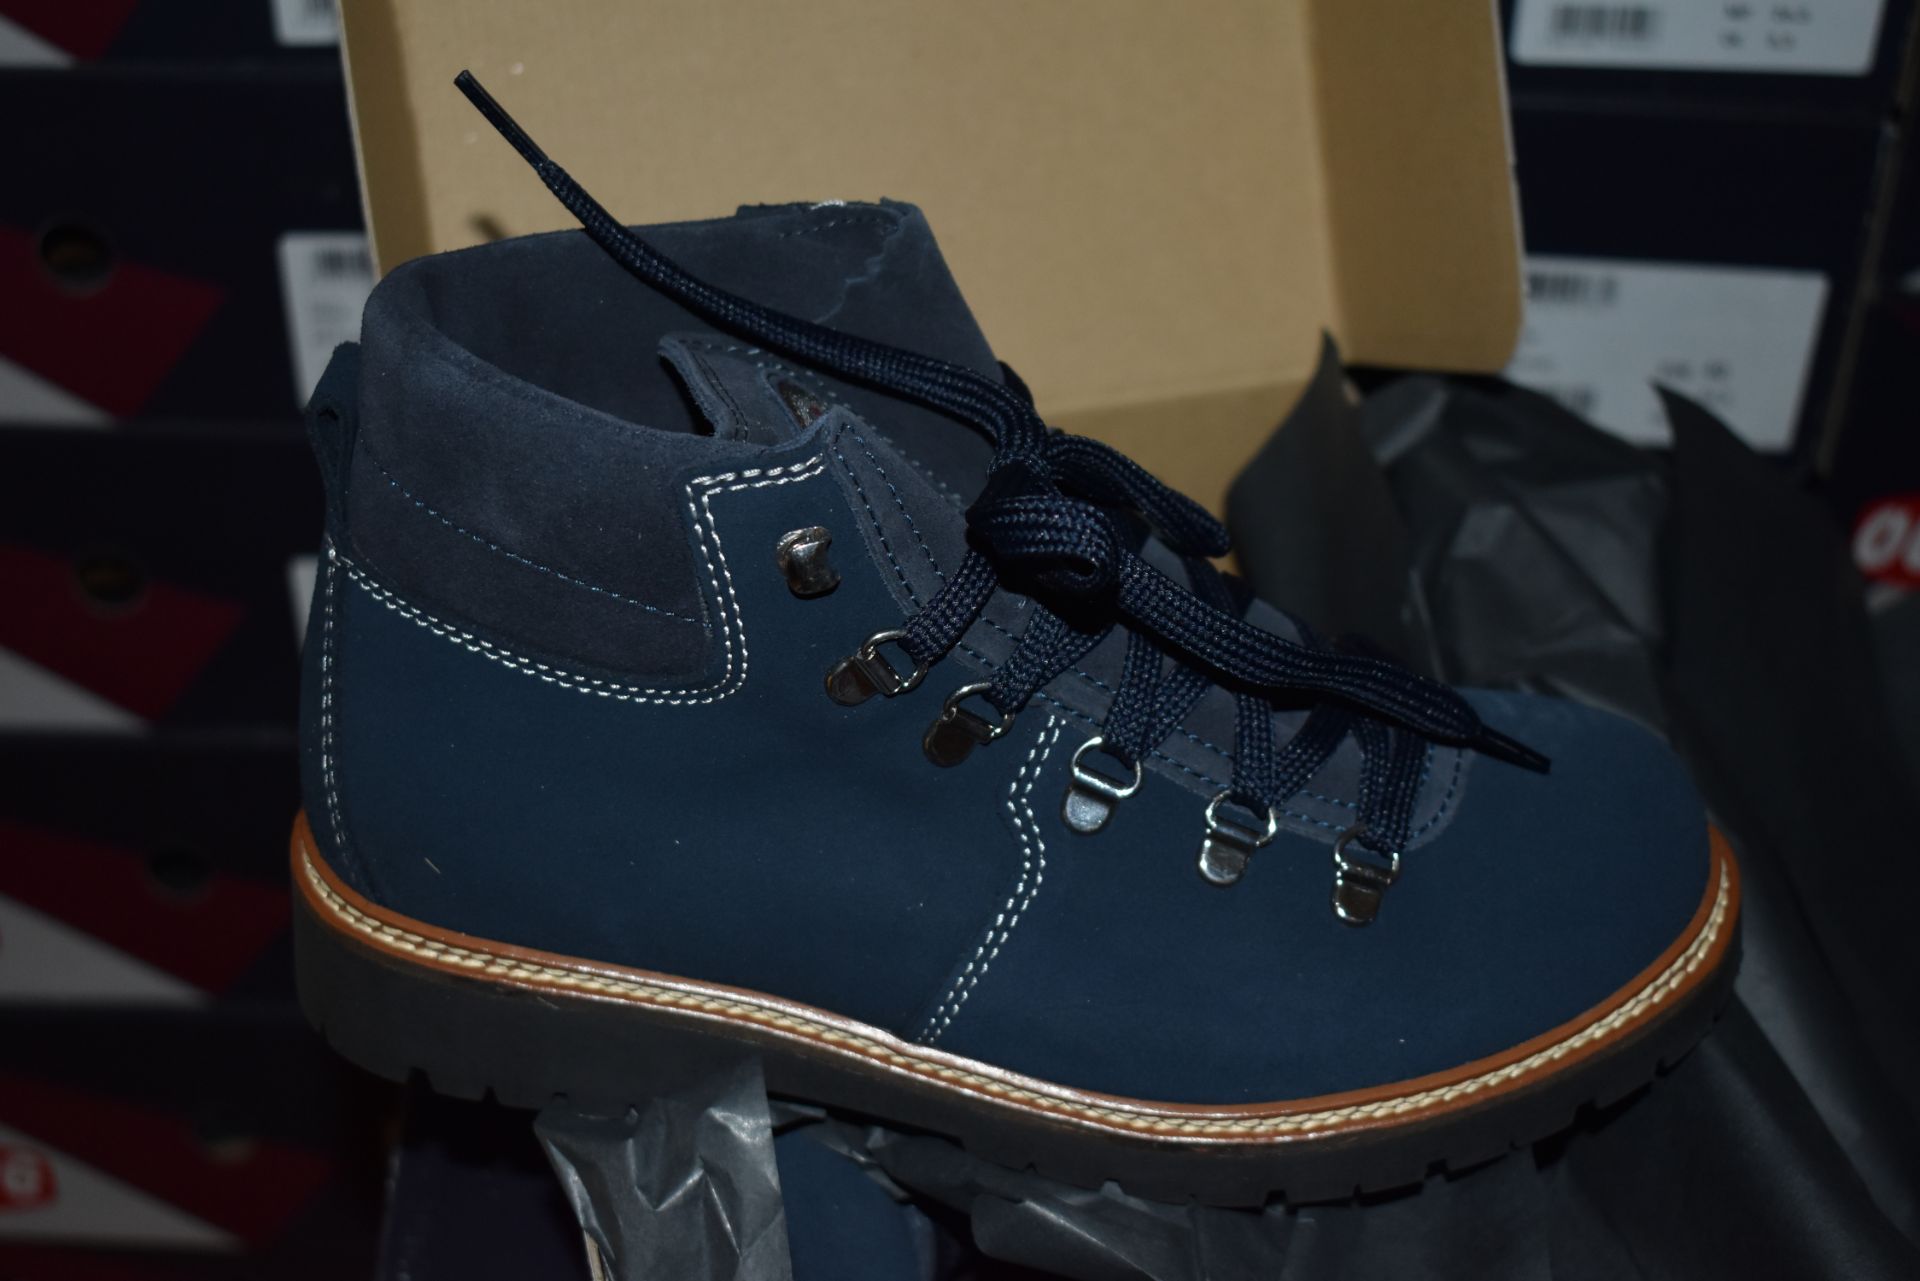 1 x Pair of Designer Olang Merano 82 Blu Women's Winter Boots - Euro Size 41 - Brand New Boxed Stock - Image 2 of 4